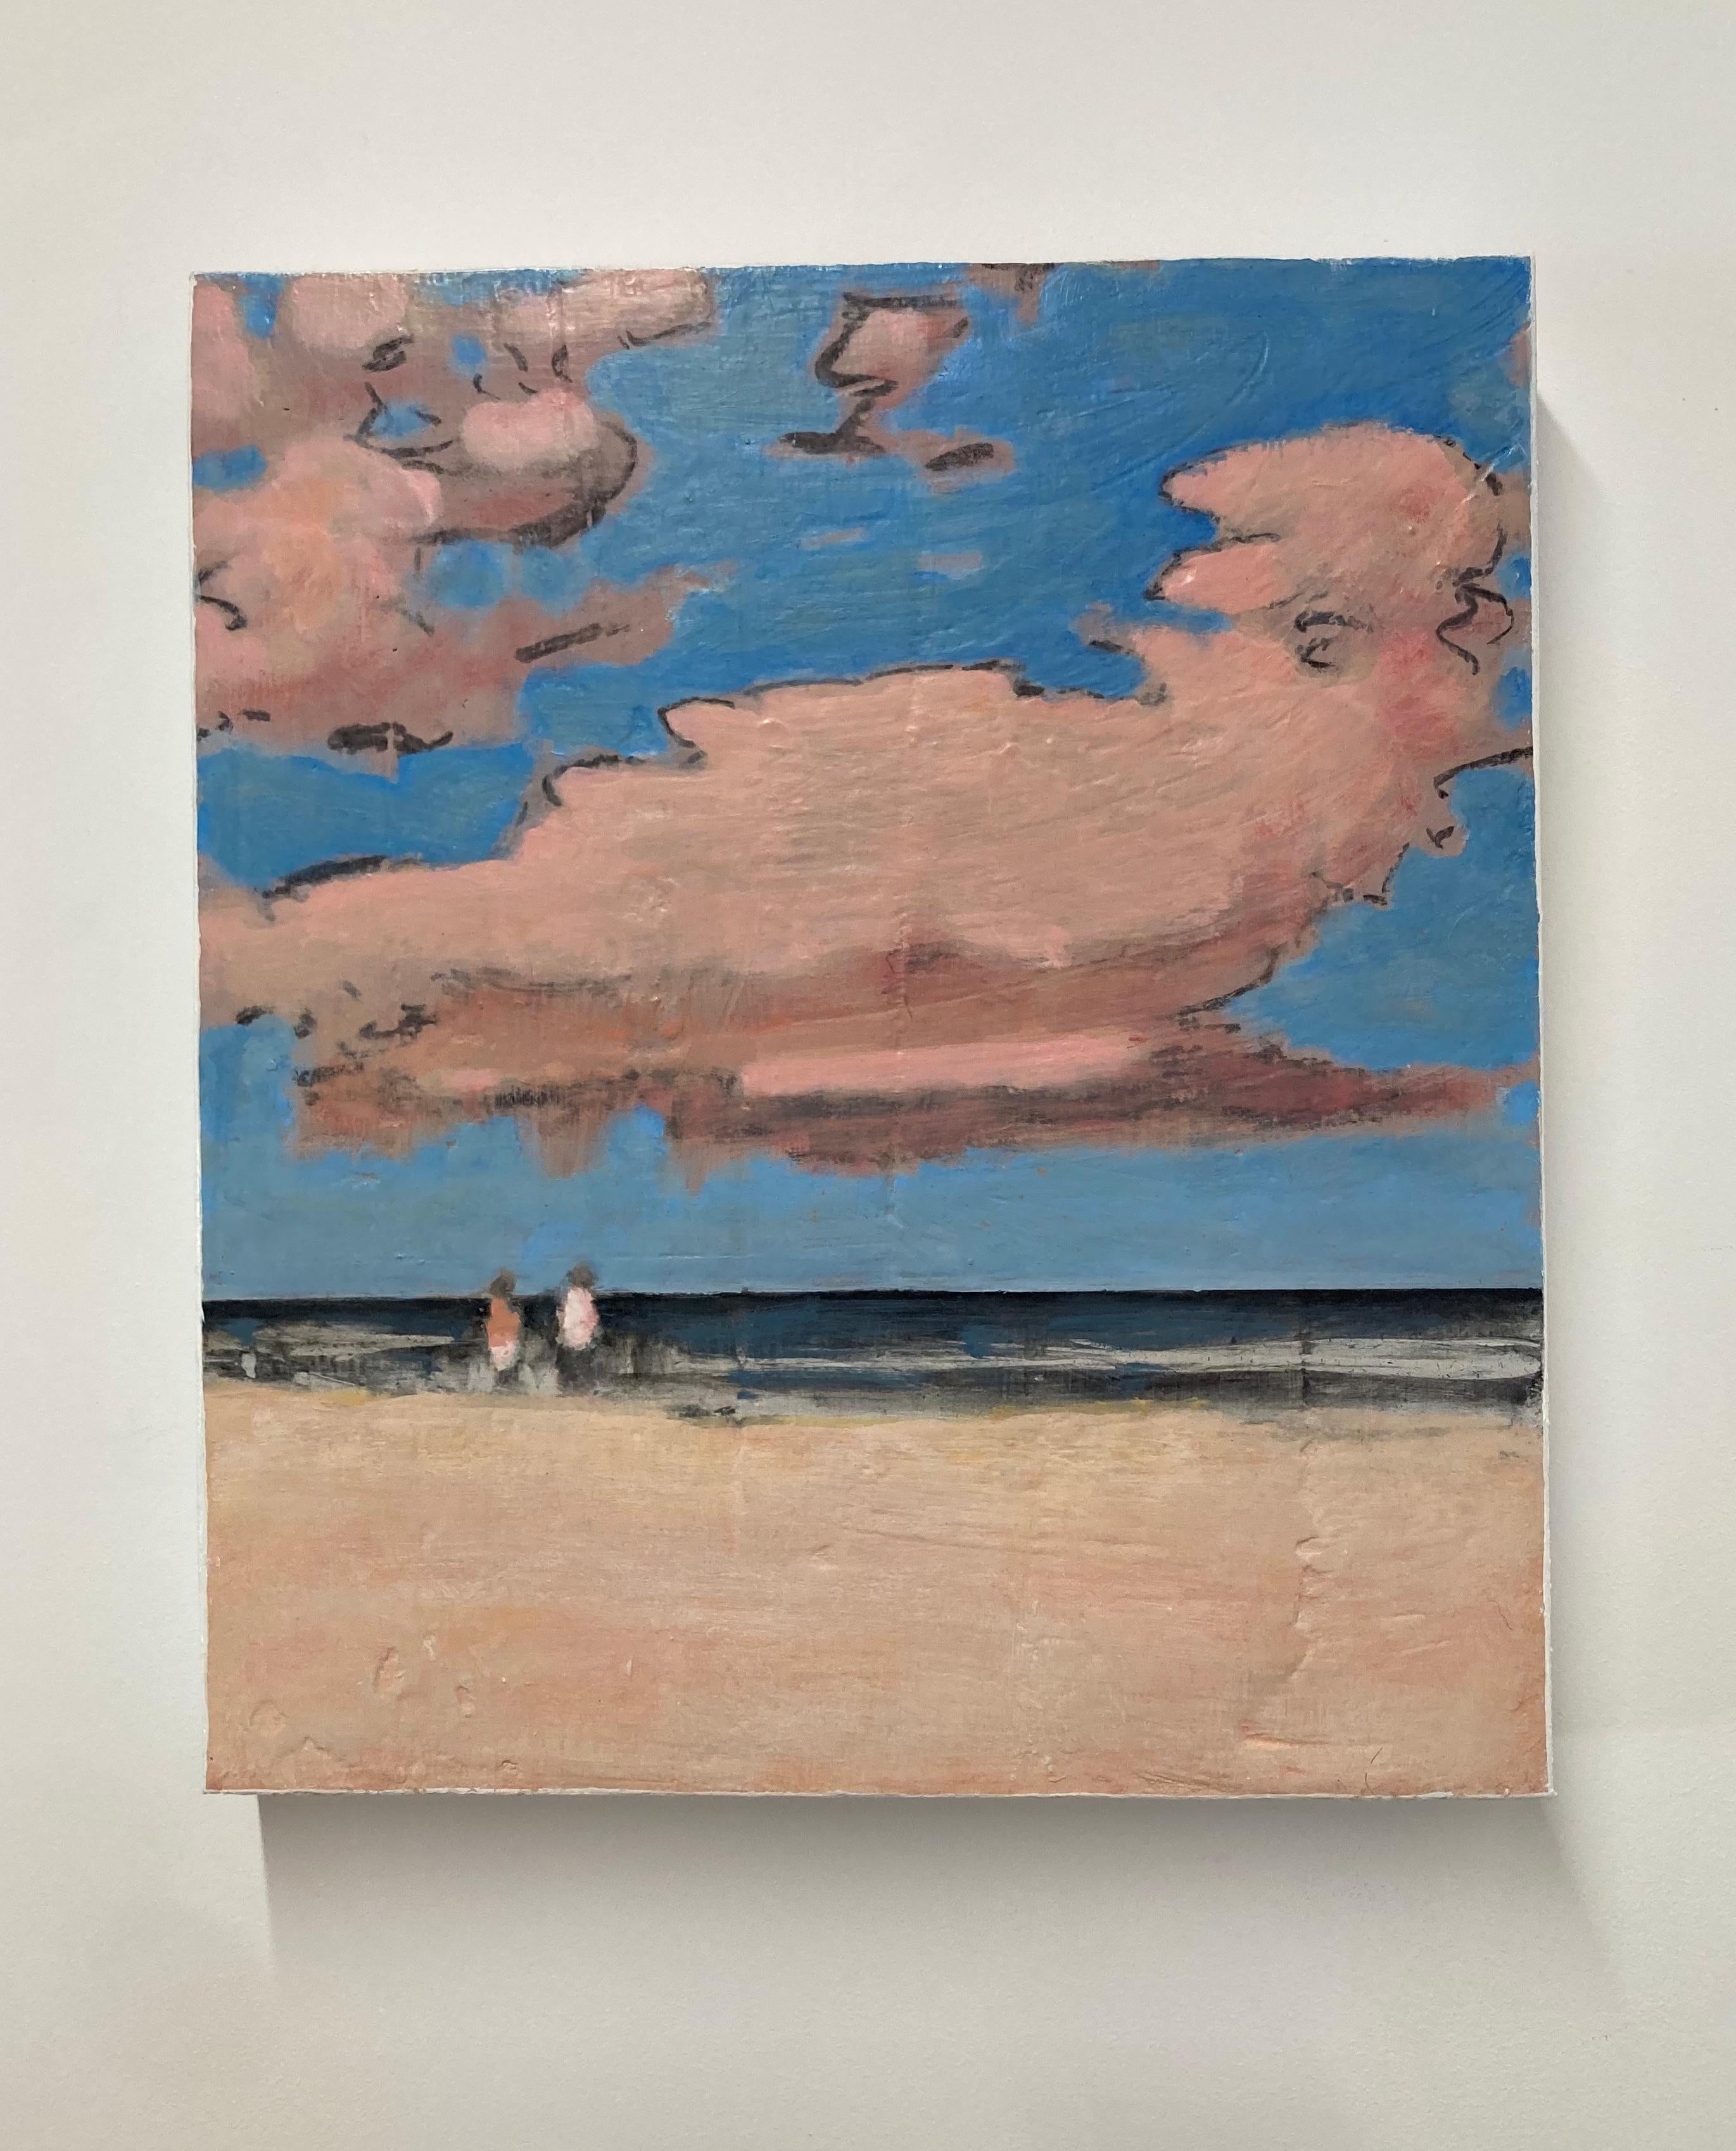 Eleven O-Five, Pale Salmon Pink Sand, Clouds, Blue Sky, Summer Beach, Beachscape - Painting by David Konigsberg